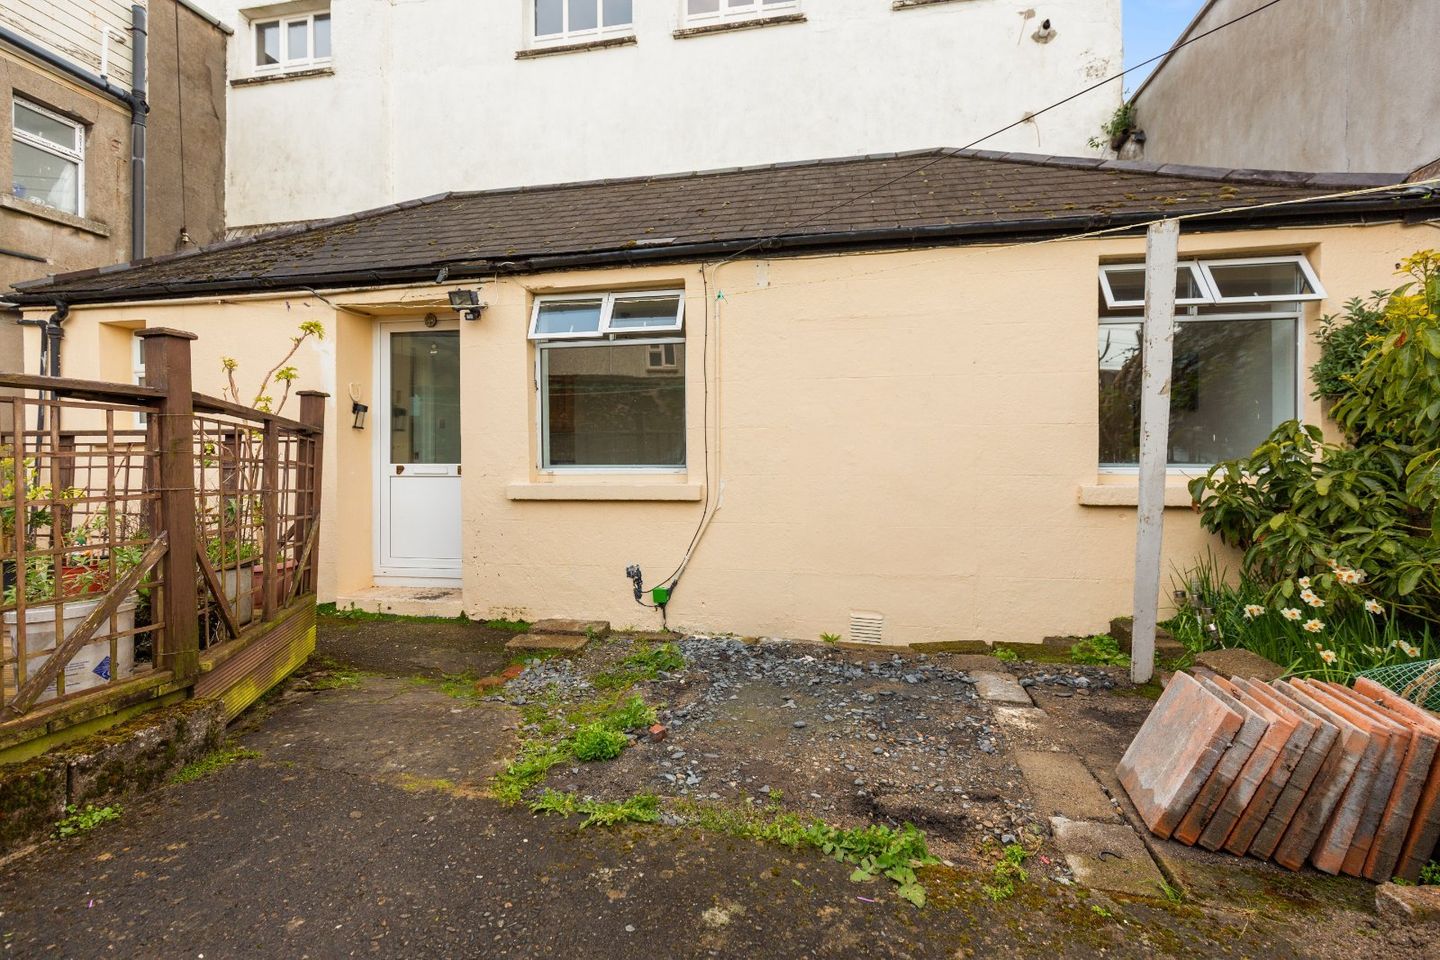 The Bungalow, The Bungalow, Rear of 76a George's Street Upper, Dun Laoghaire, Co. Dublin, A96P9R2